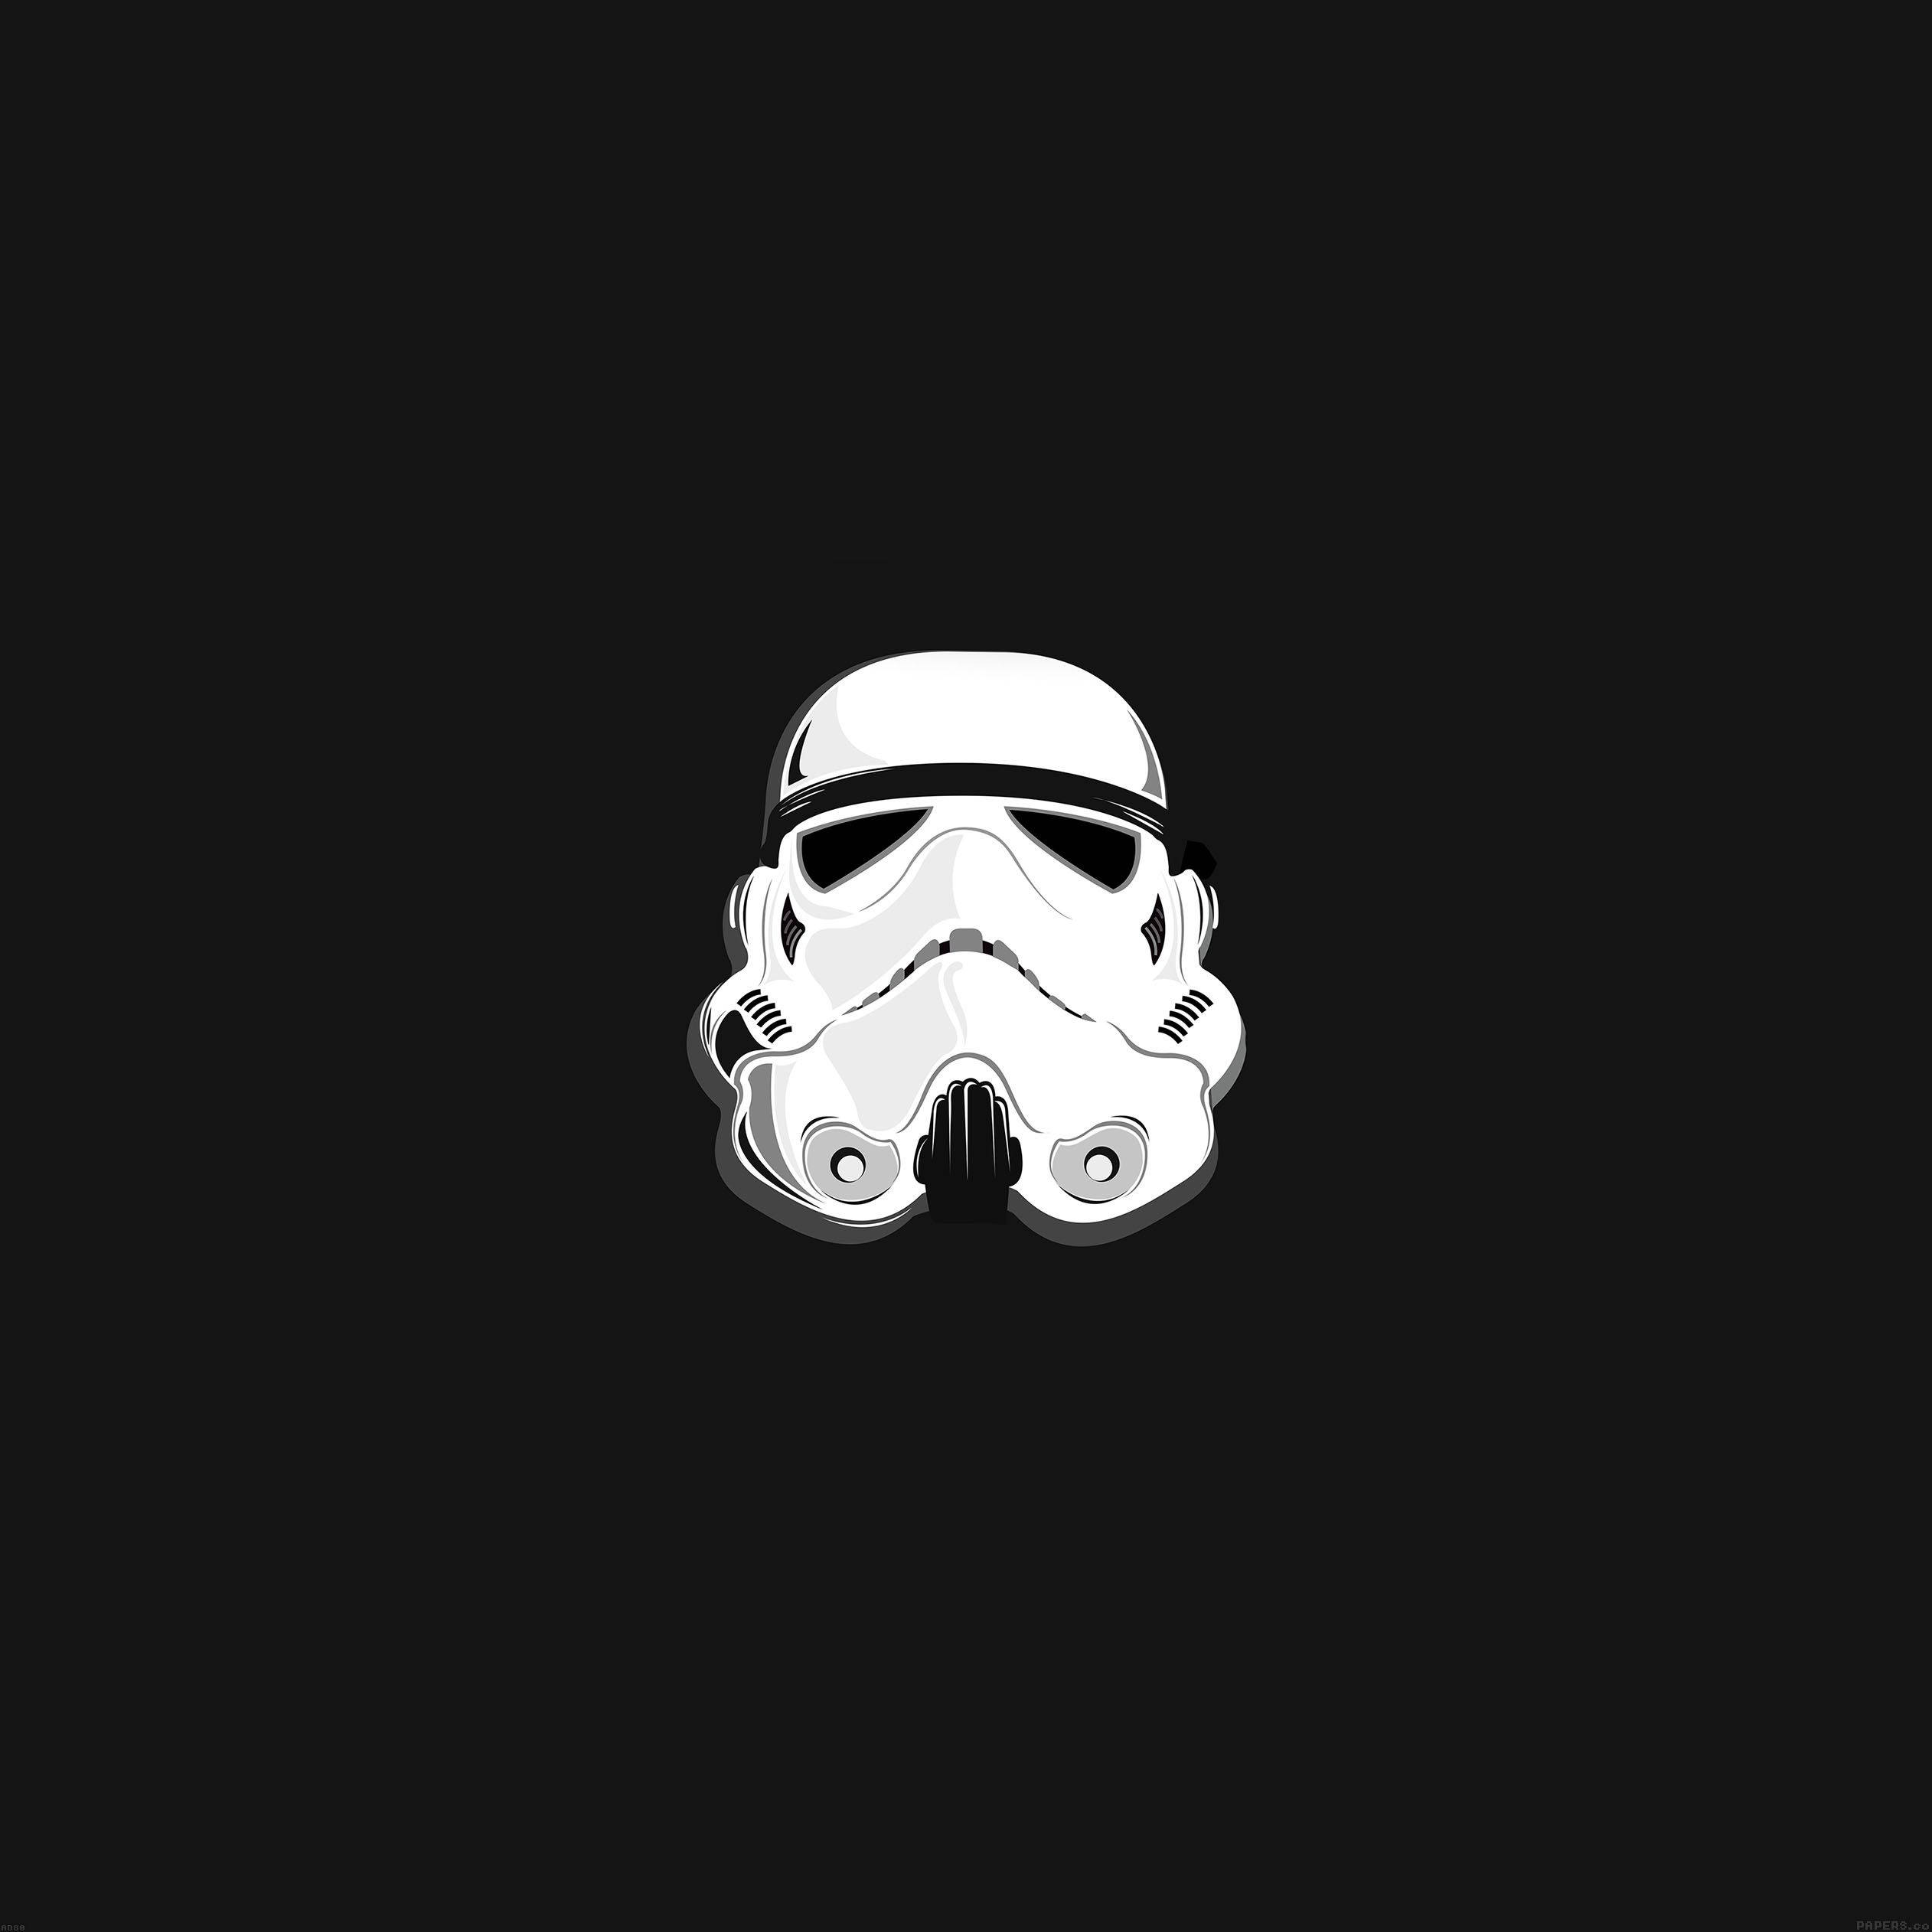 Awesome Stormtrooper Star Wars Tablet Background